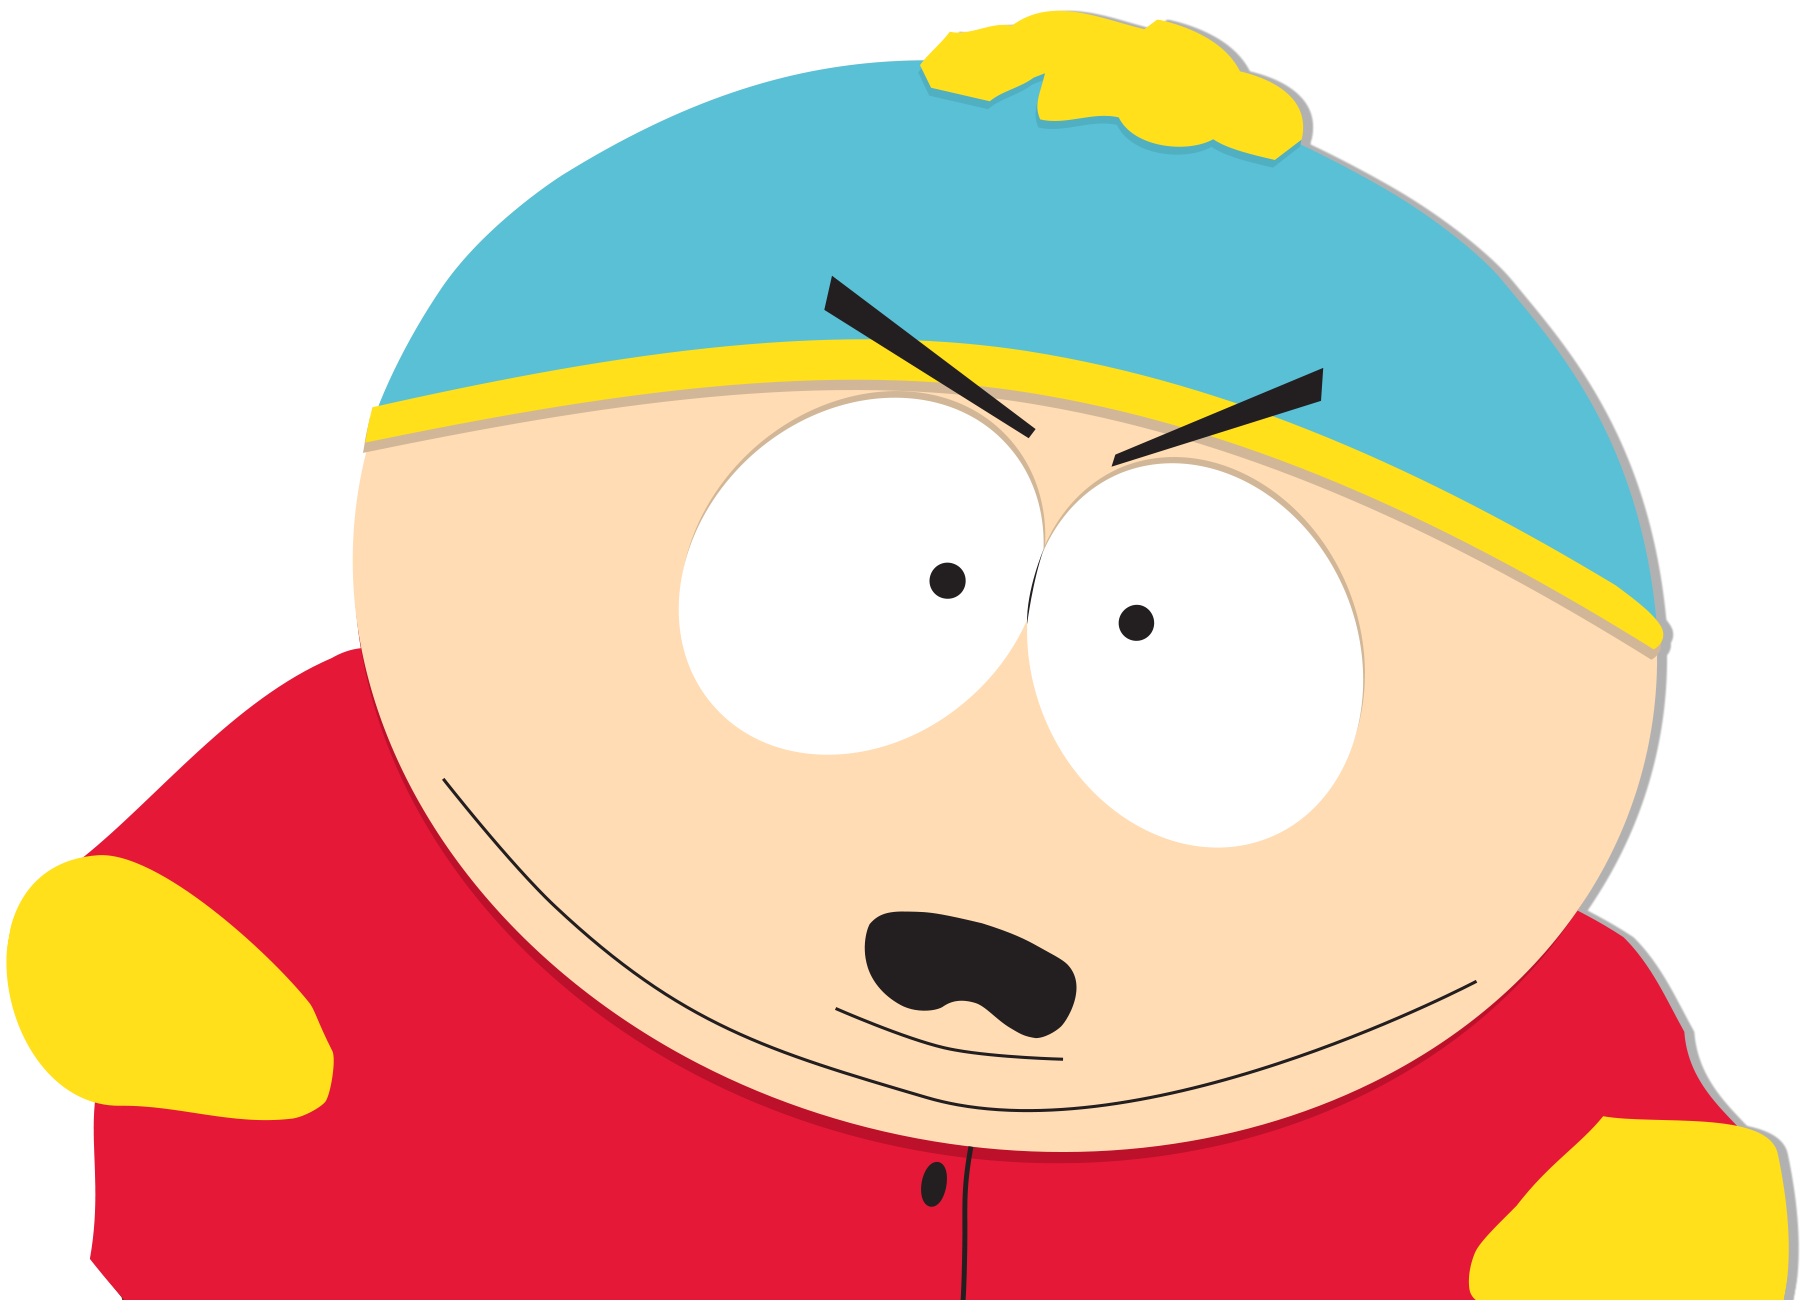 bao thoa recommends pics of cartman from south park pic